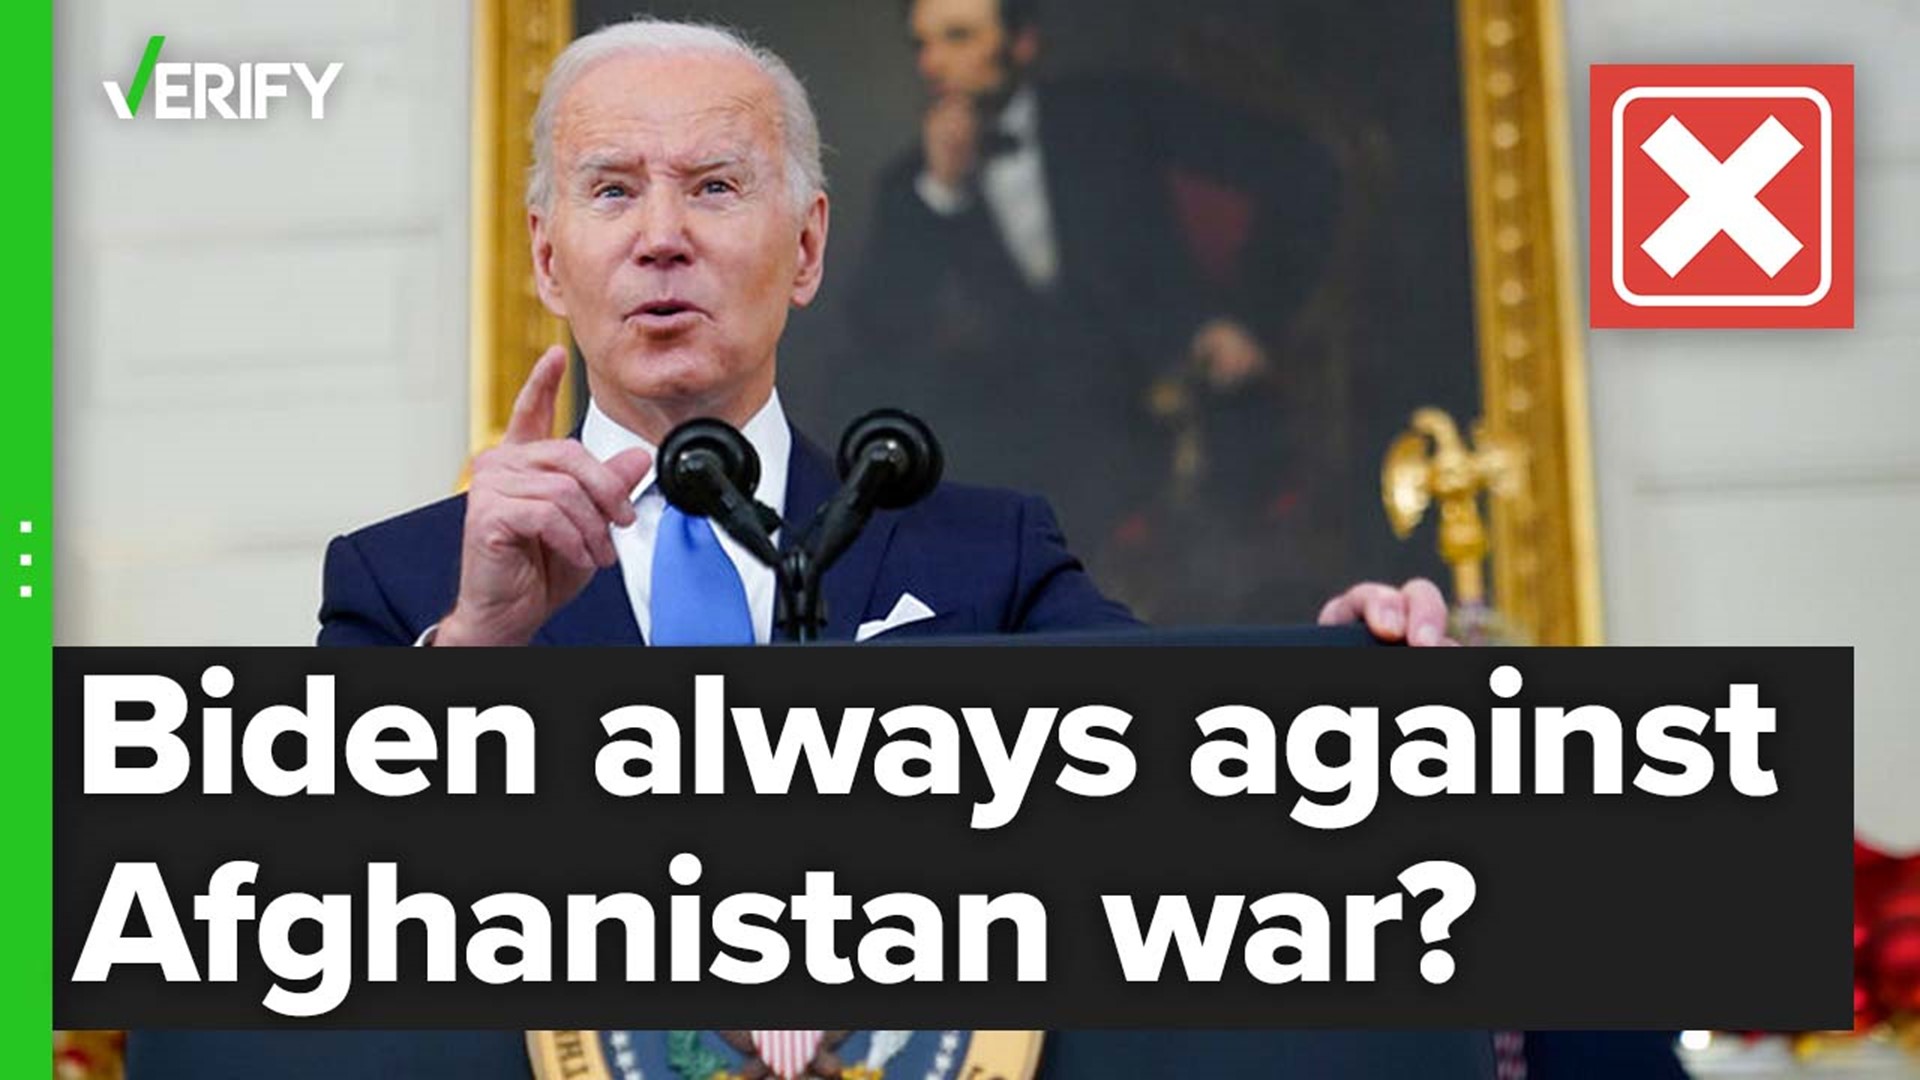 In a recent interview, the president talked about Afghanistan and said he was against the war “from the very beginning.” That’s false.